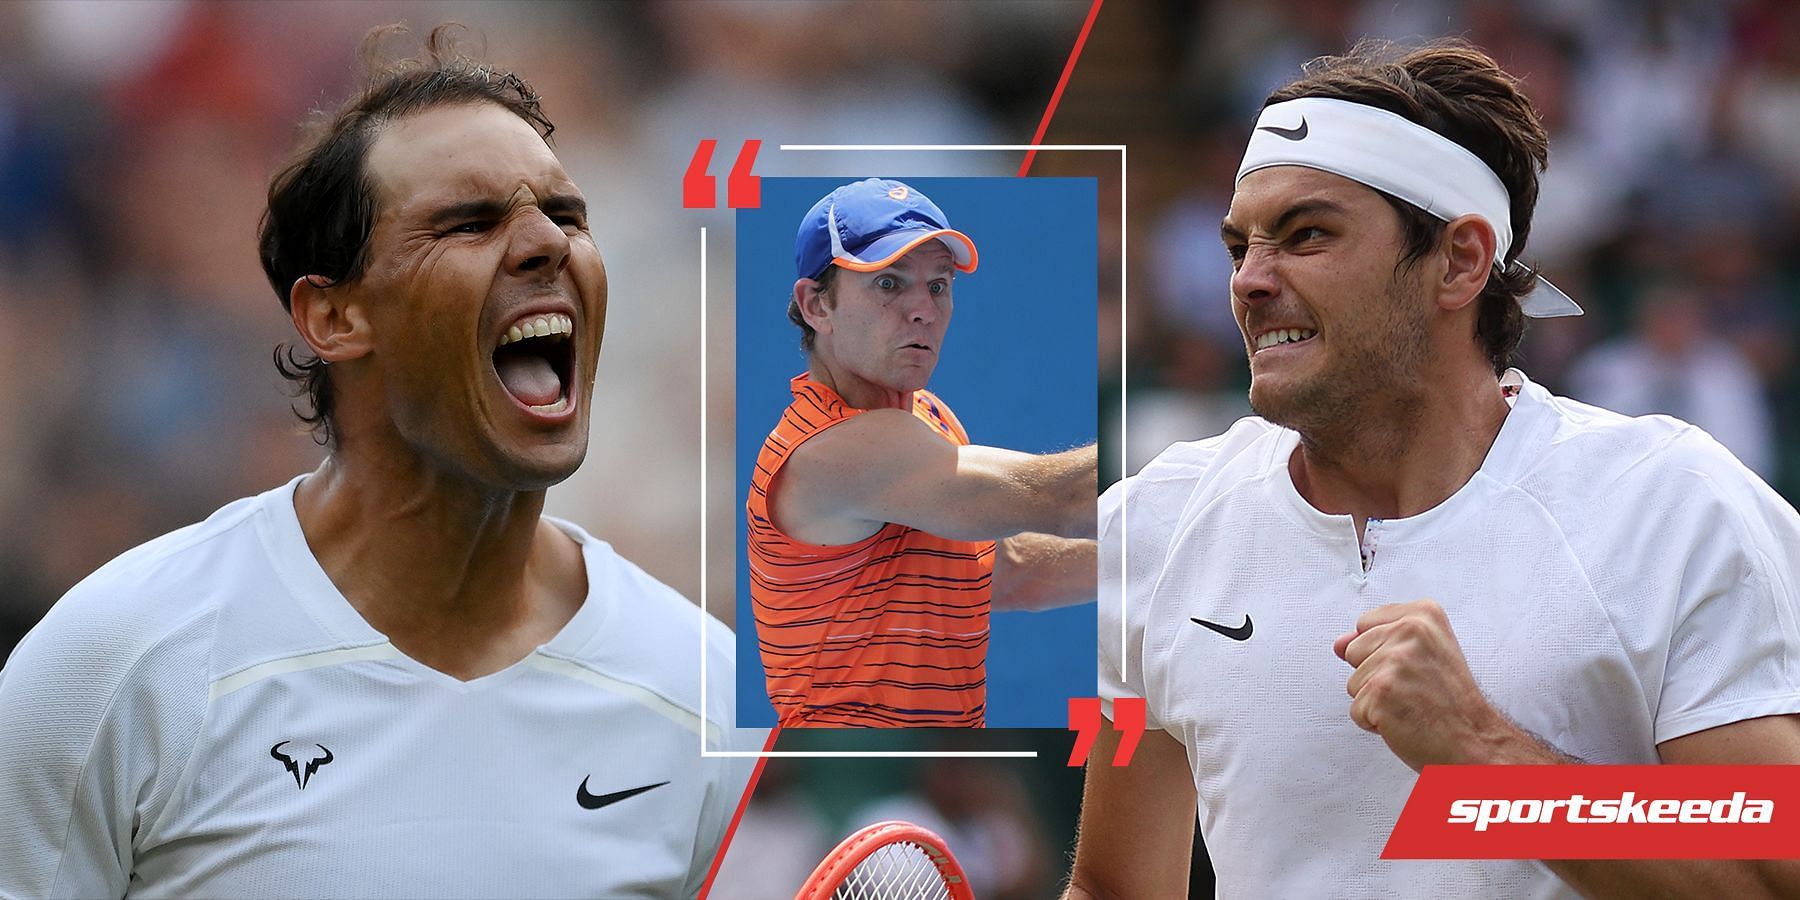 Rafael Nadal and Taylor Fritz are 1-1 in their head-to-head